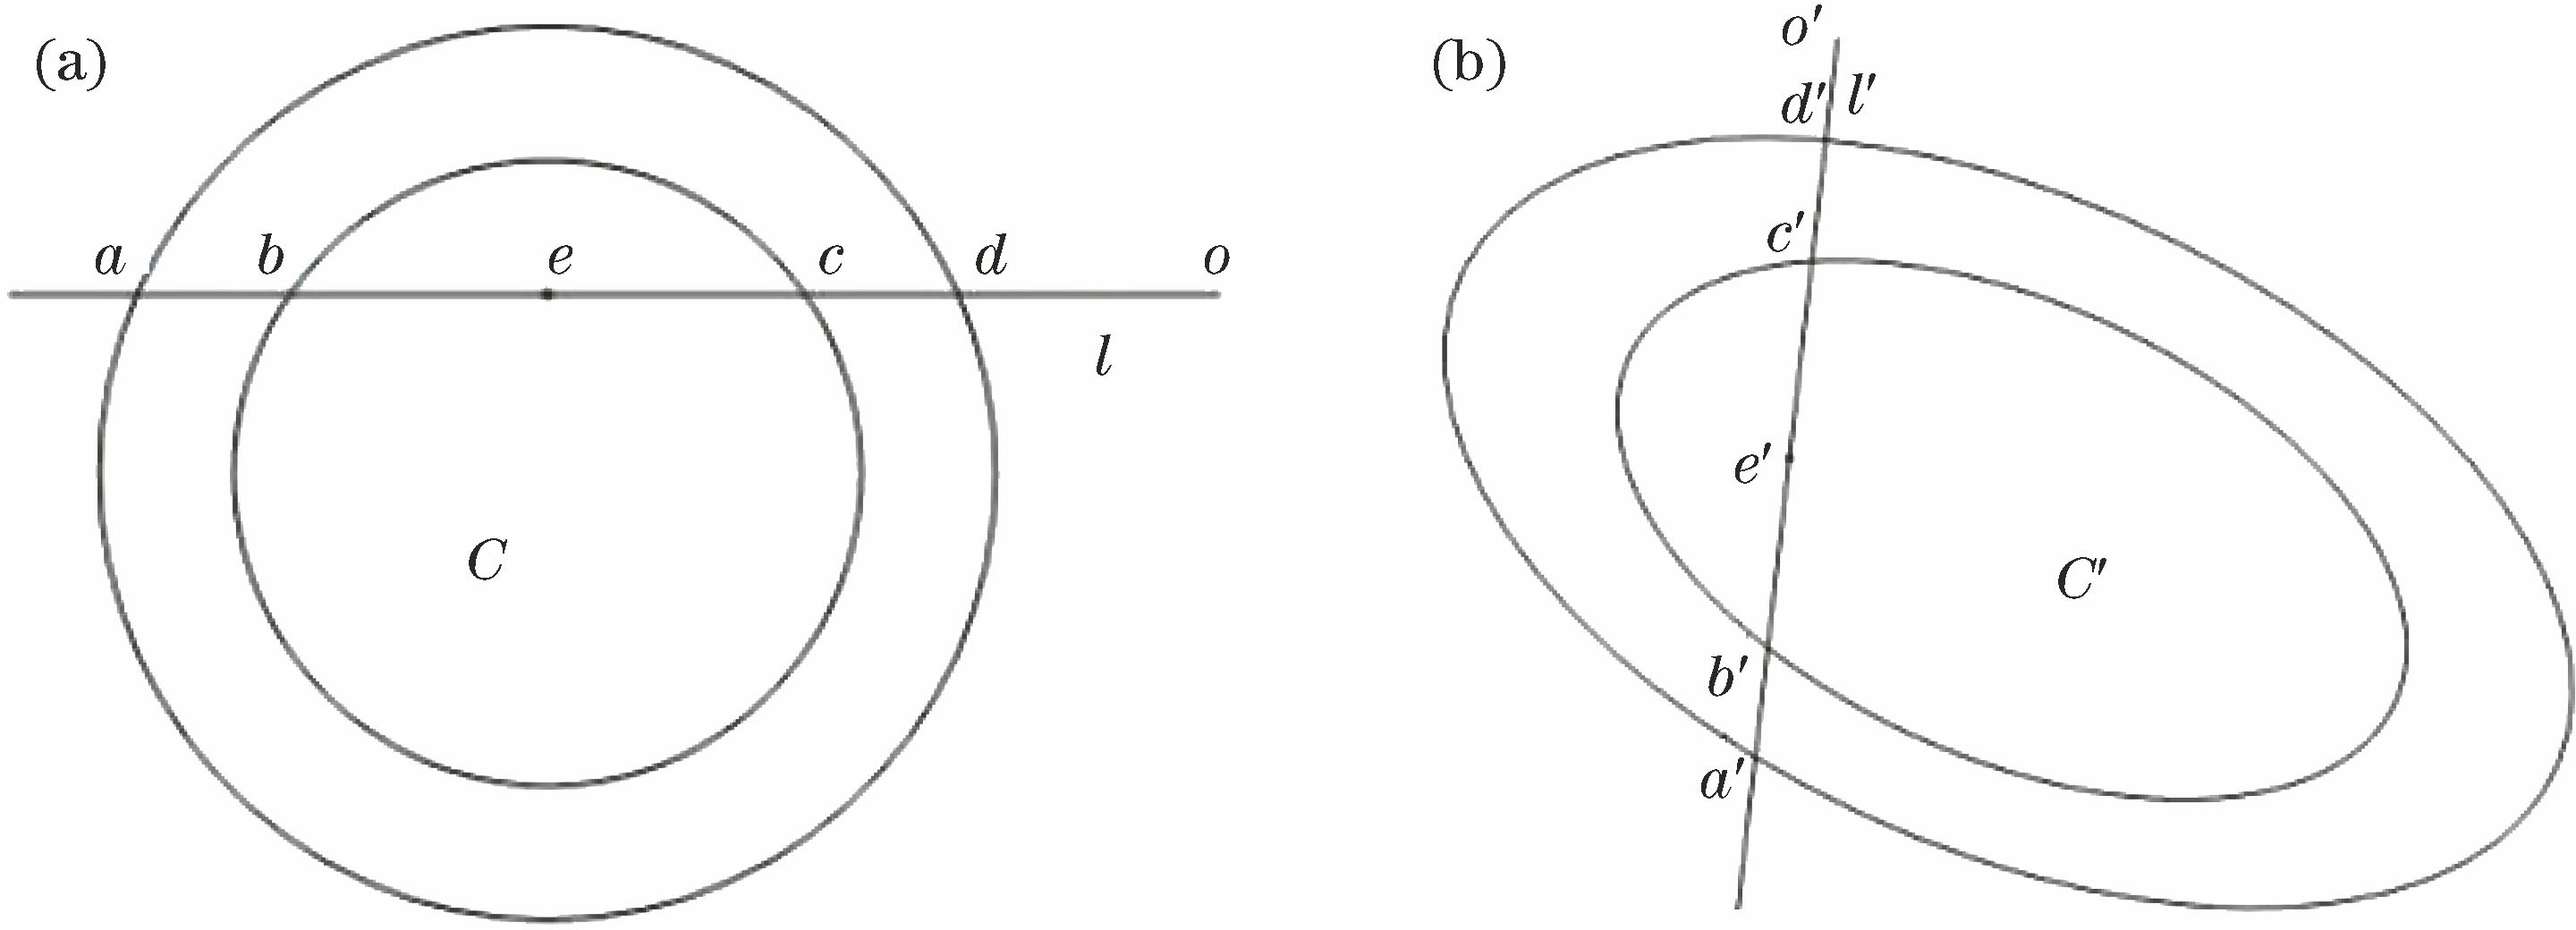 Diagrams of relationship between object and image. (a) Intersection points of space straight line and marks; (b) intersection points of straight line image and mark images